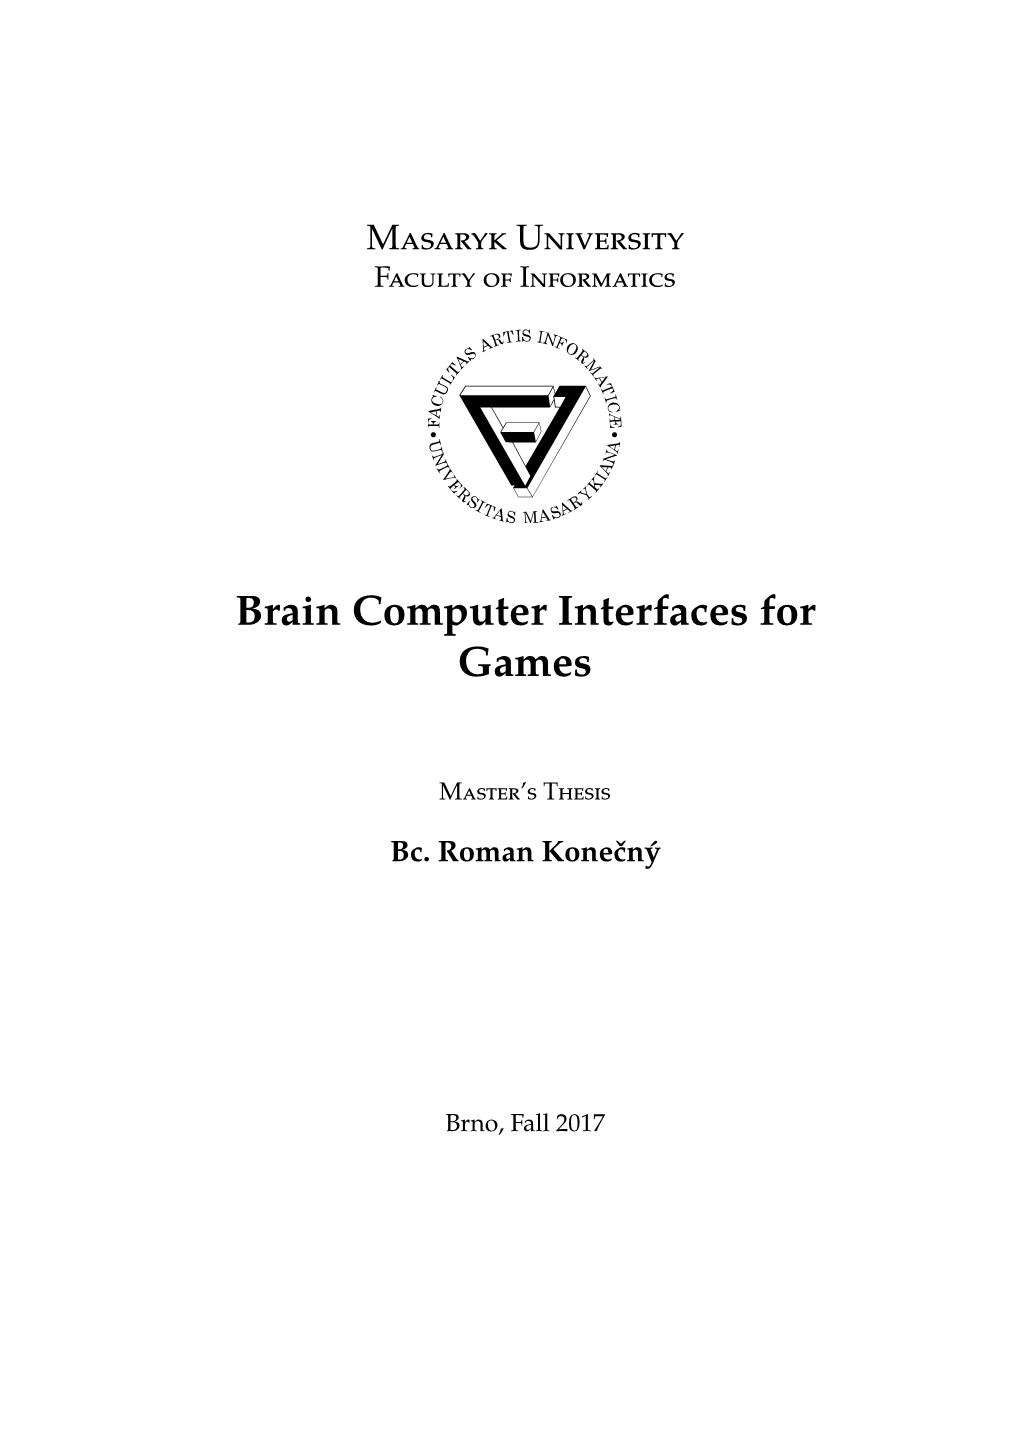 Brain Computer Interfaces for Games